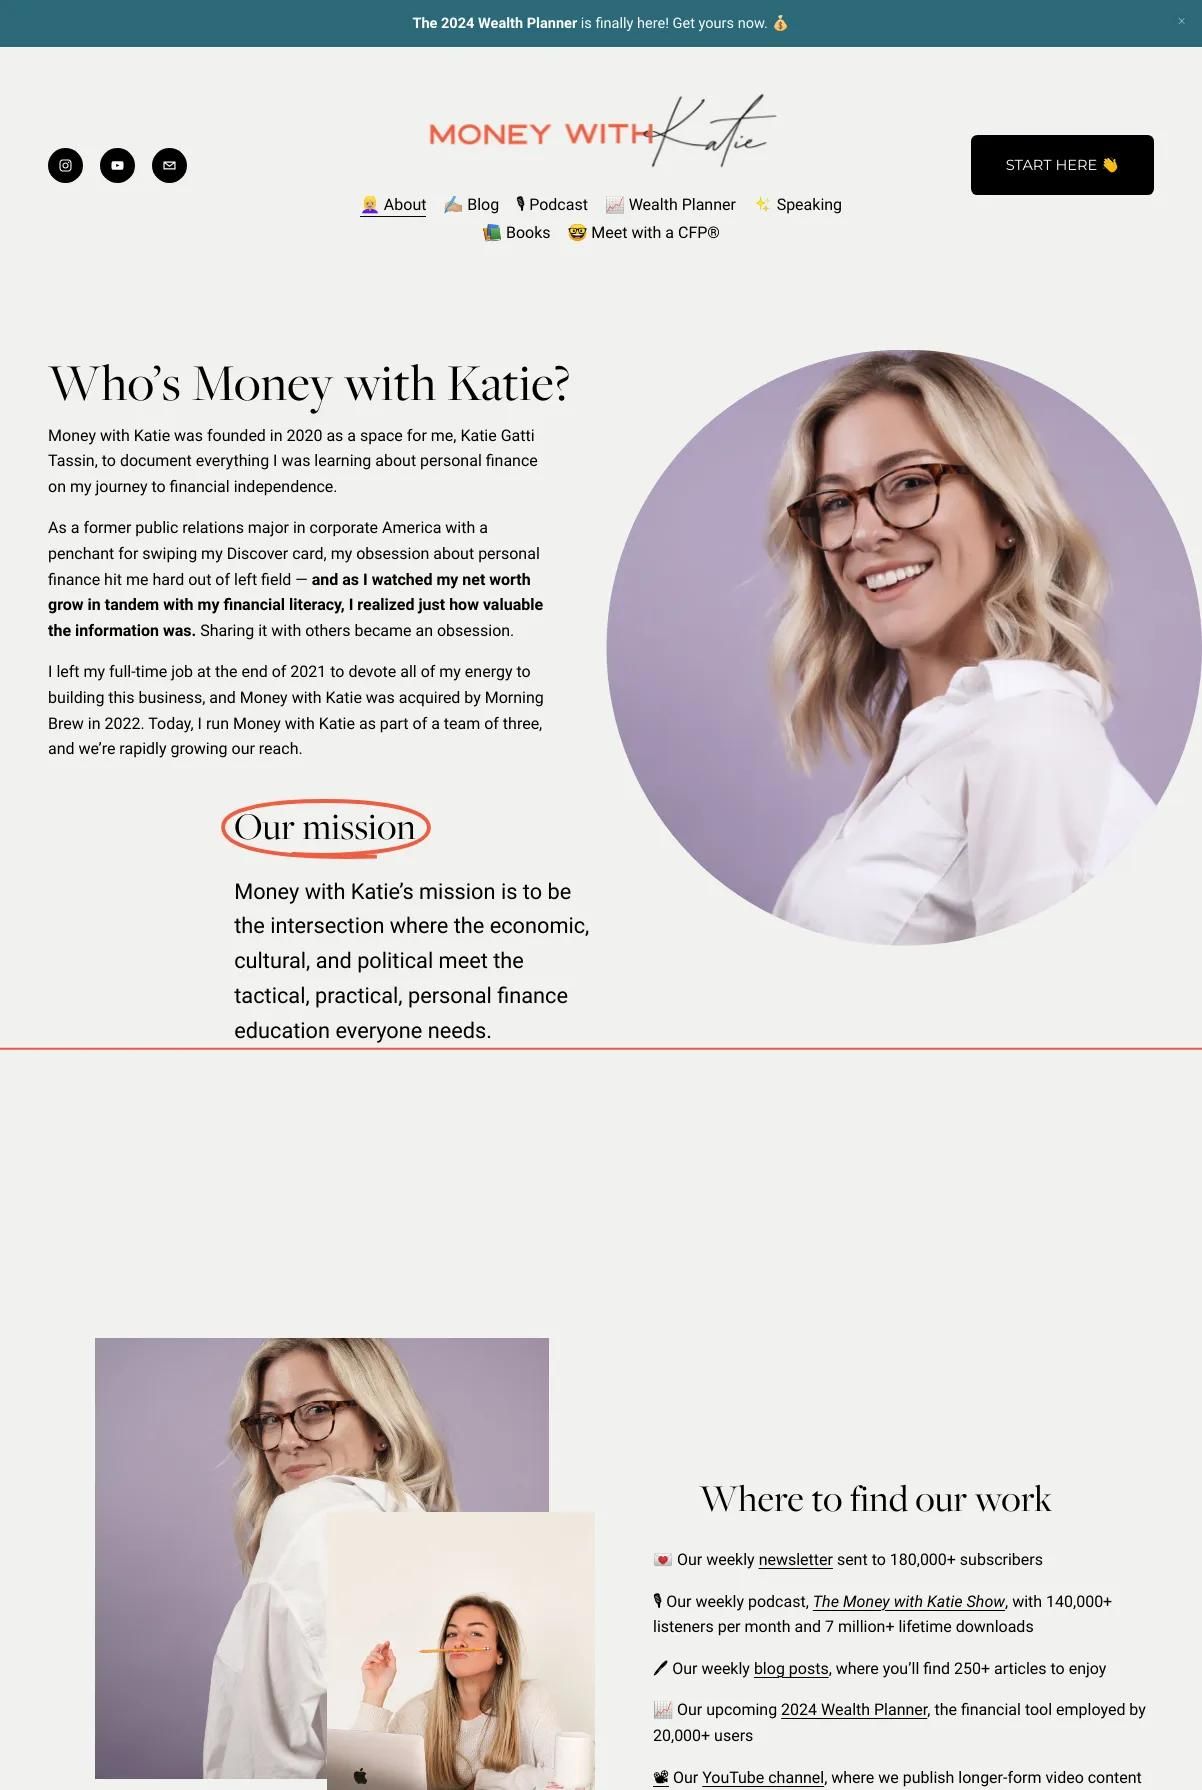 Screenshot 2 of Money With Katie (Example Squarespace Podcast Website)